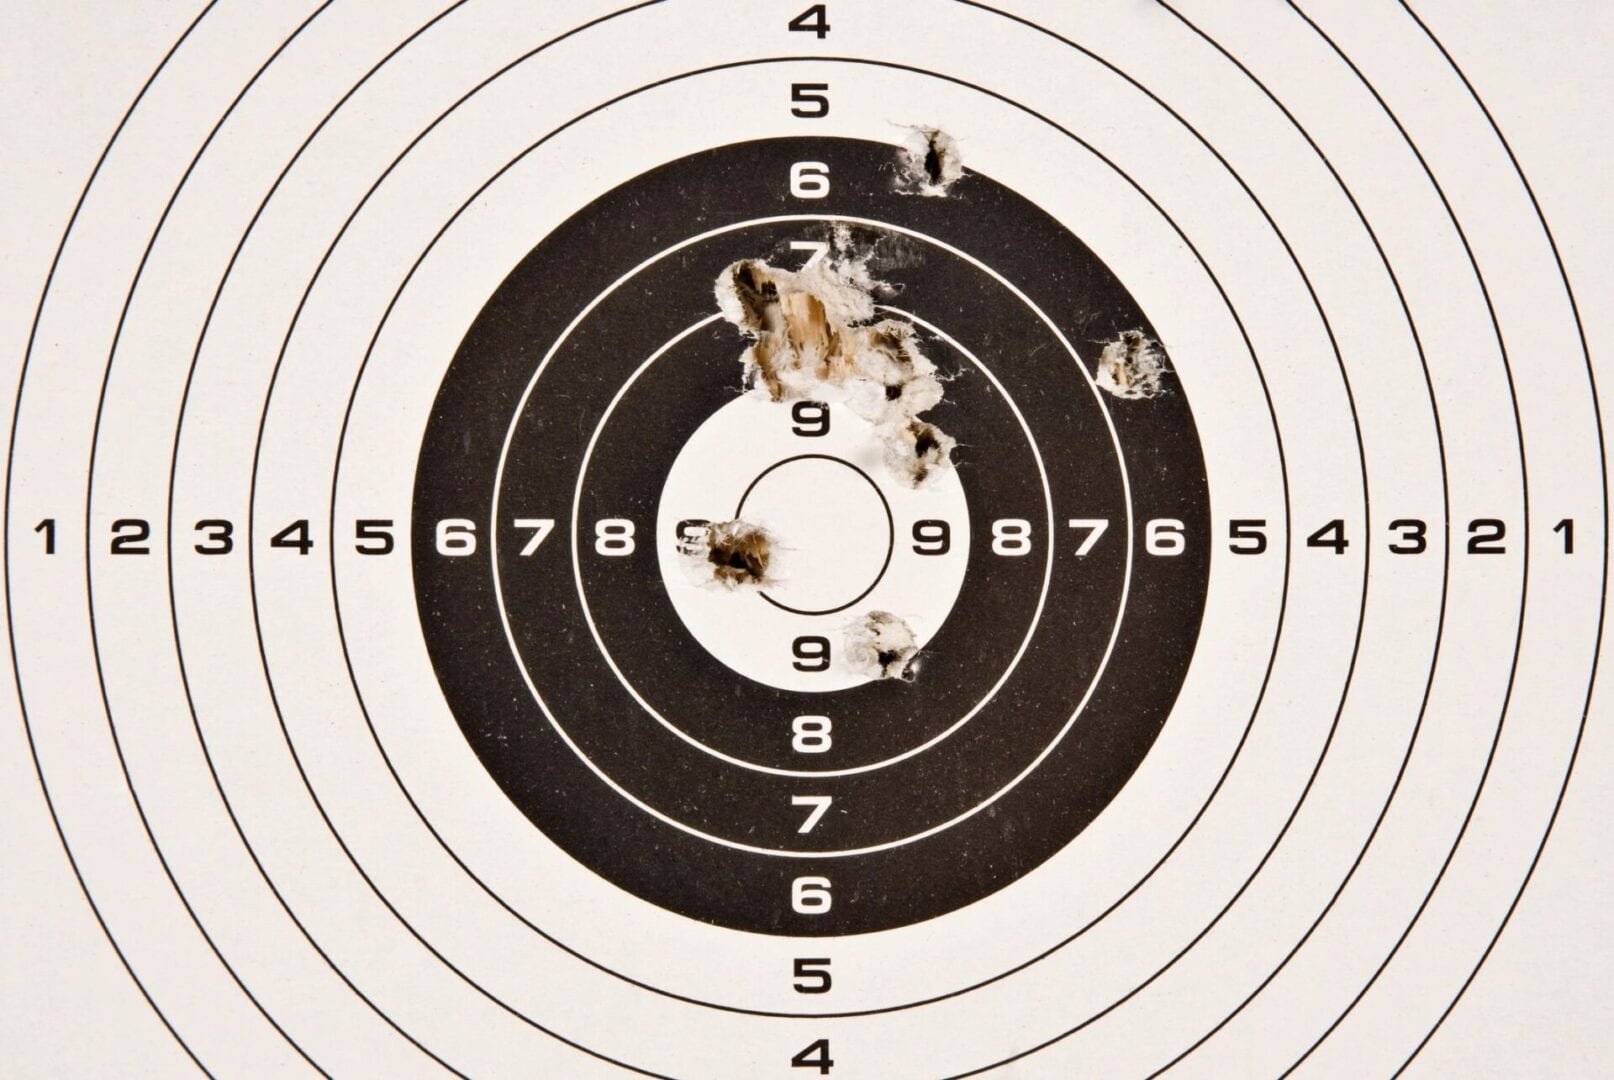 A close up of a target with bullet holes